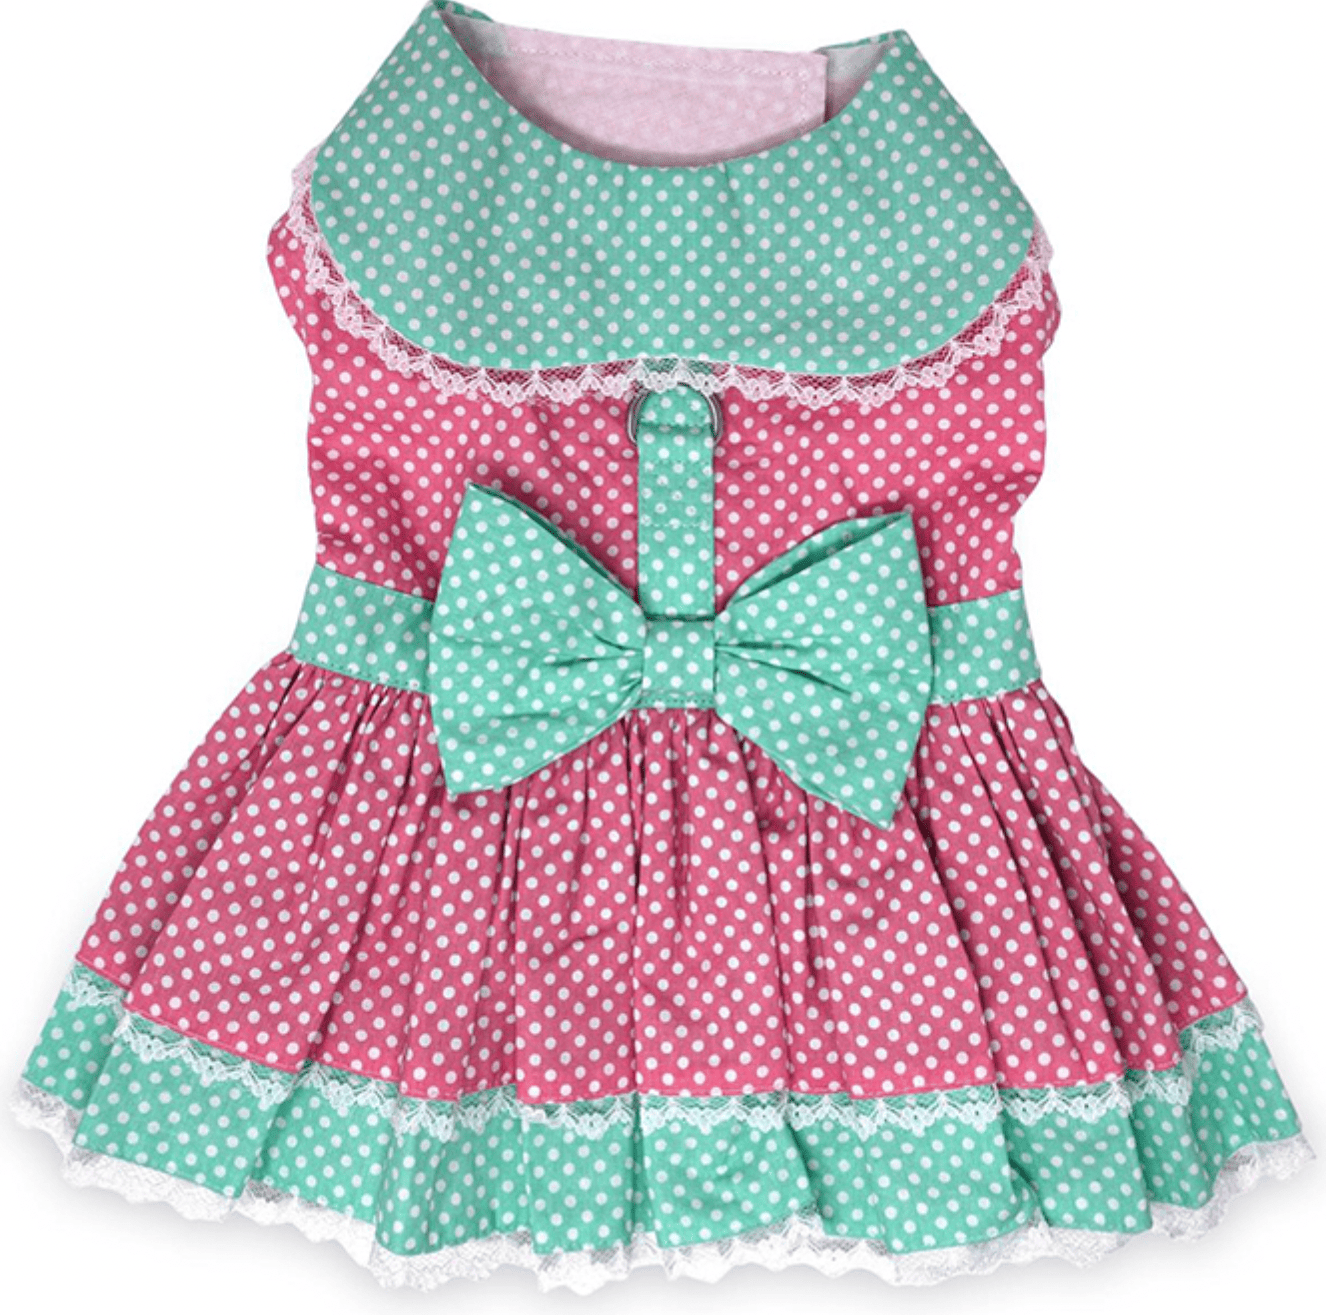 Polka Dot and Lace Dog Dress Set with Leash - Pink and Teal.